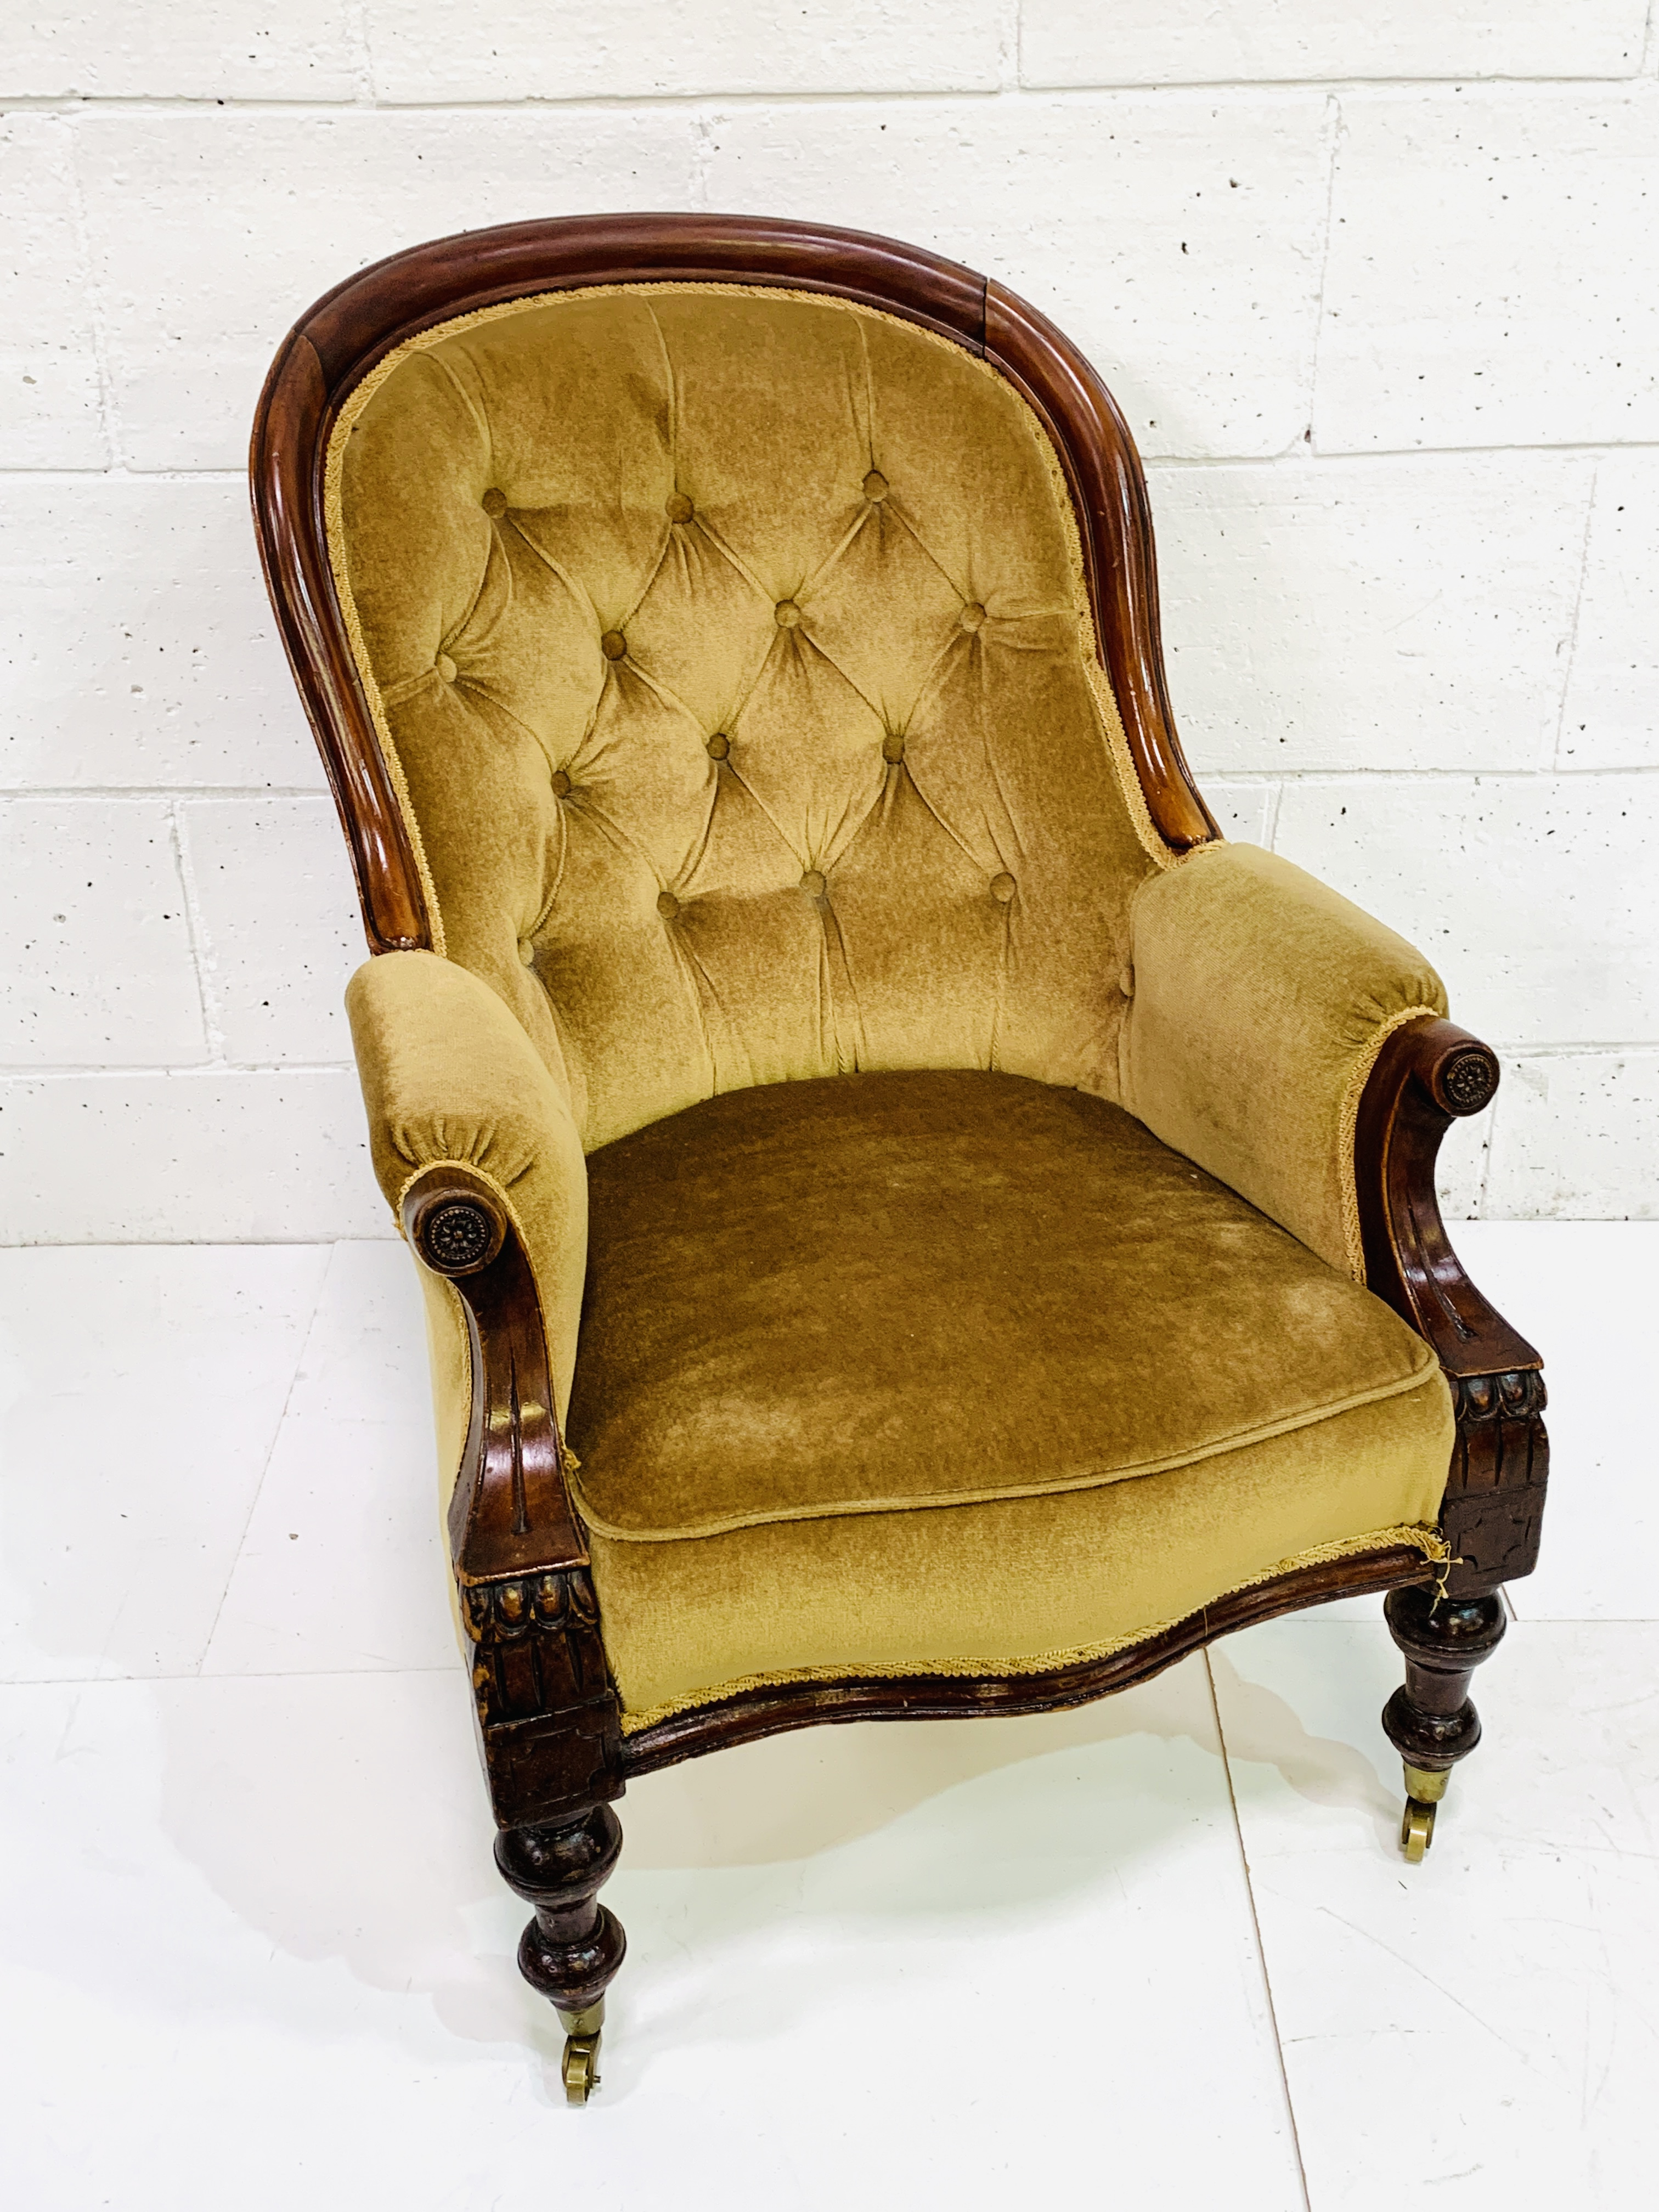 Victorian mahogany framed button back armchair - Image 3 of 3